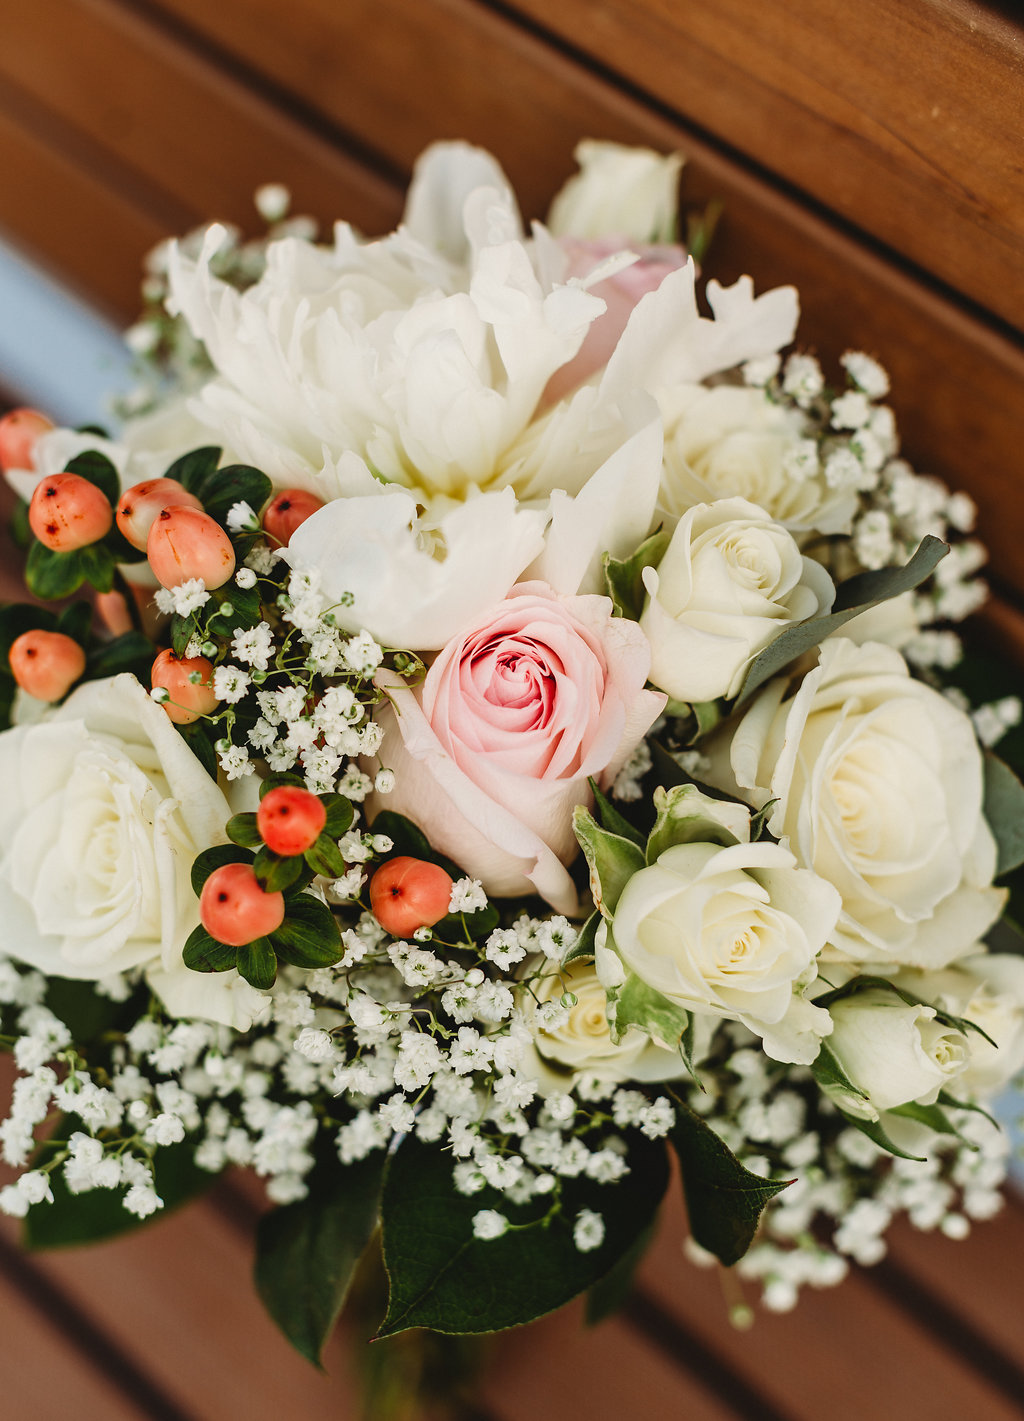 Simple White and Blush Pink Roses, Baby's Breathe and Berries Wedding Floral Bouquet